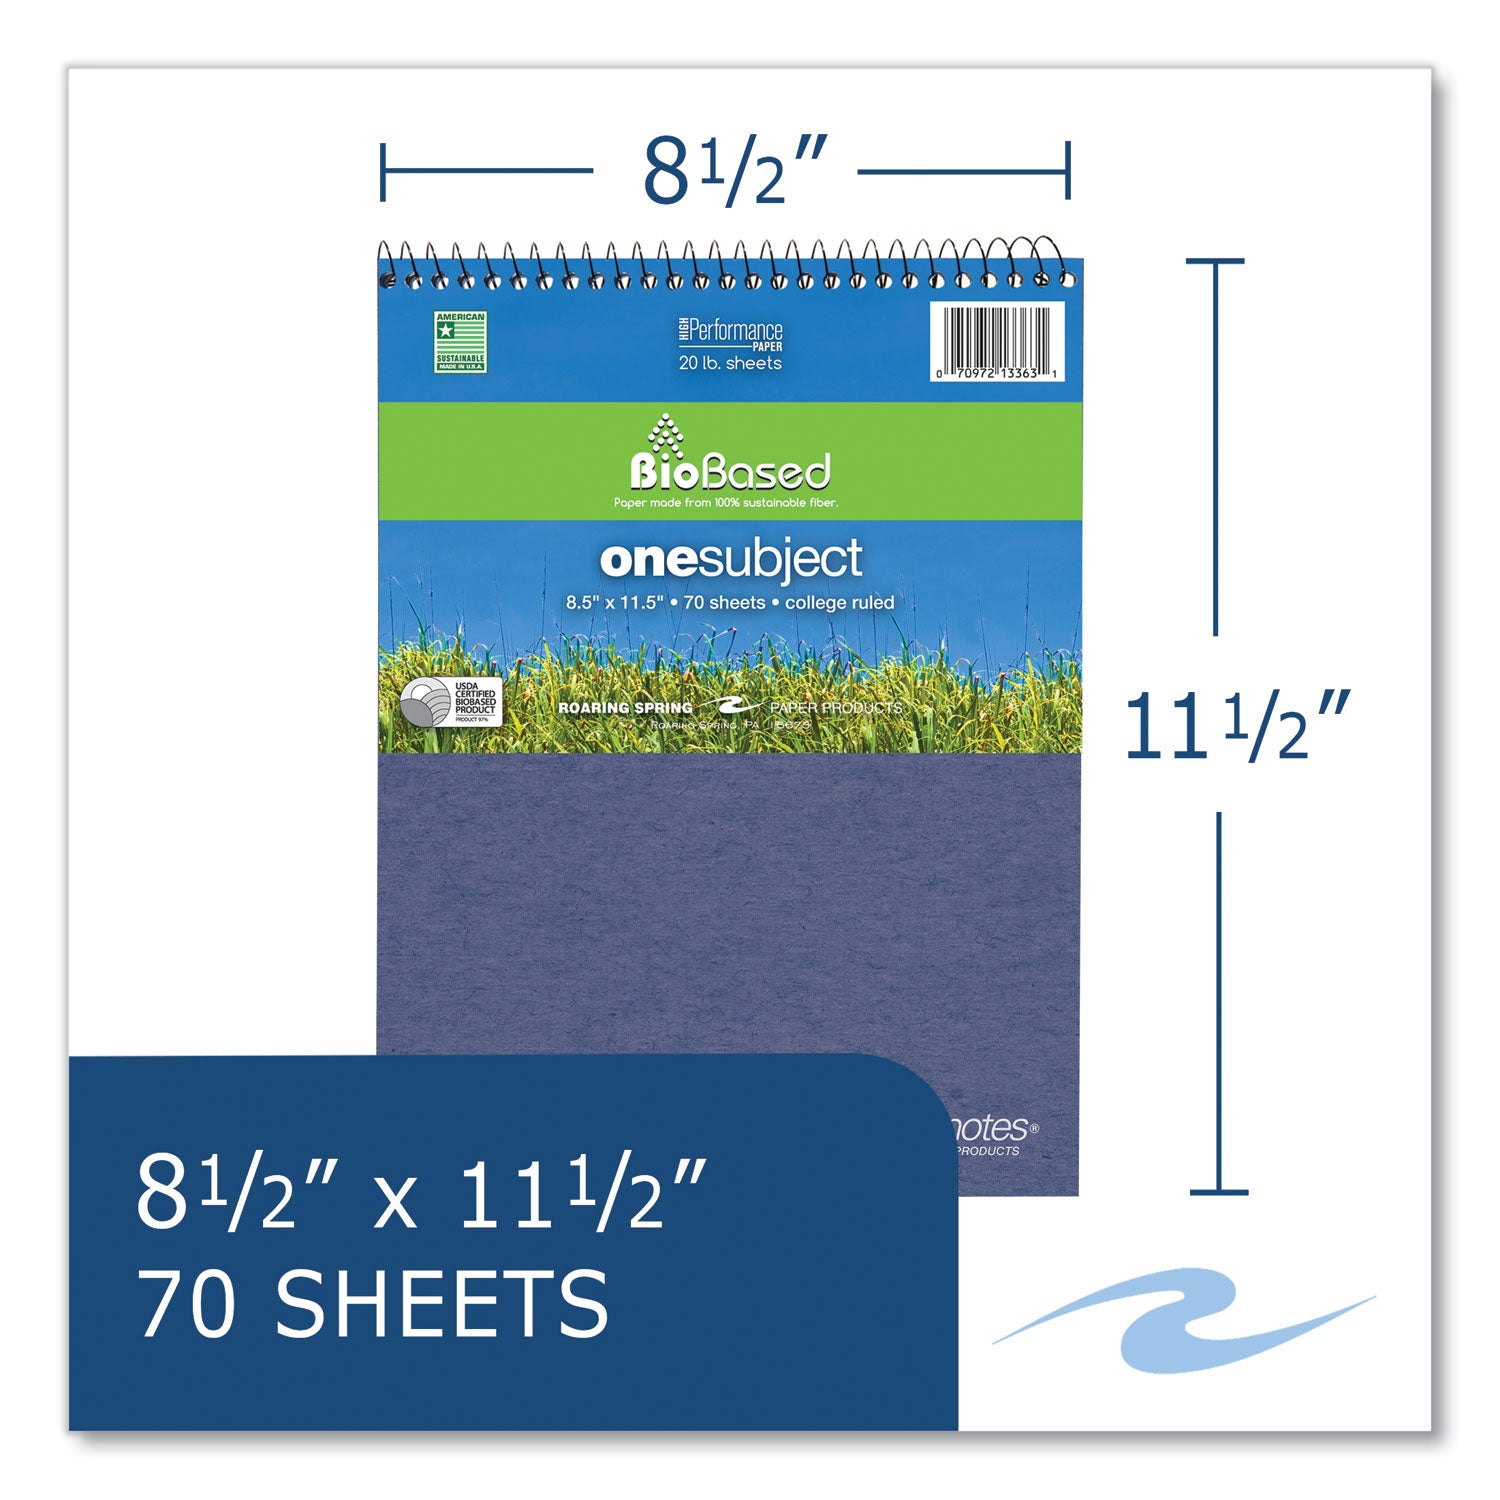 earthtones-biobased-1-subject-notebook-med-college-rule-asst-covers-70-85x115-sheets-24-ct-ships-in-4-6-bus-days_roa13363cs - 3